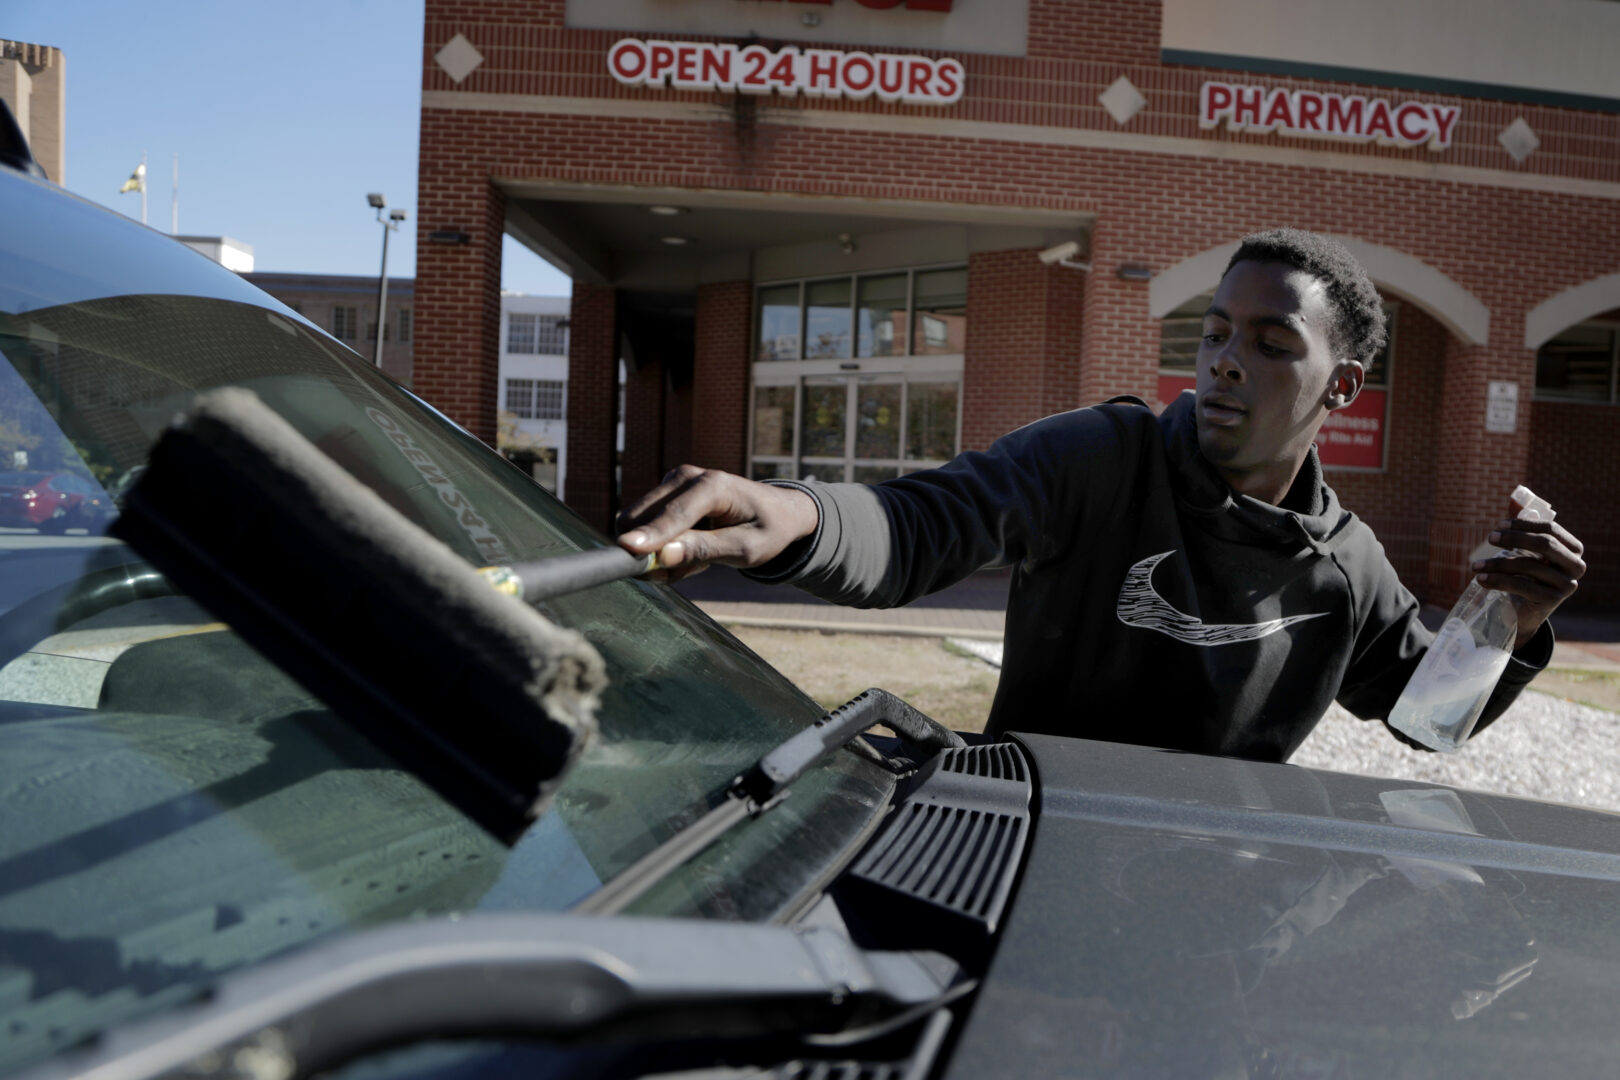 In this Thursday, Oct. 24, 2019 photo, Nathaniel Silas squeegees a windshield of a truck stopped at a red light in Baltimore. A debate over Baltimore's so-called squeegee kids is reaching a crescendo as the city grapples with issues of crime and poverty and a complicated history with race relations. Officials estimate 100 squeegee kids regularly work at intersections citywide, dashing into the street as red lights hit to clean windshields in exchange for cash from drivers. (AP Photo/Julio Cortez)